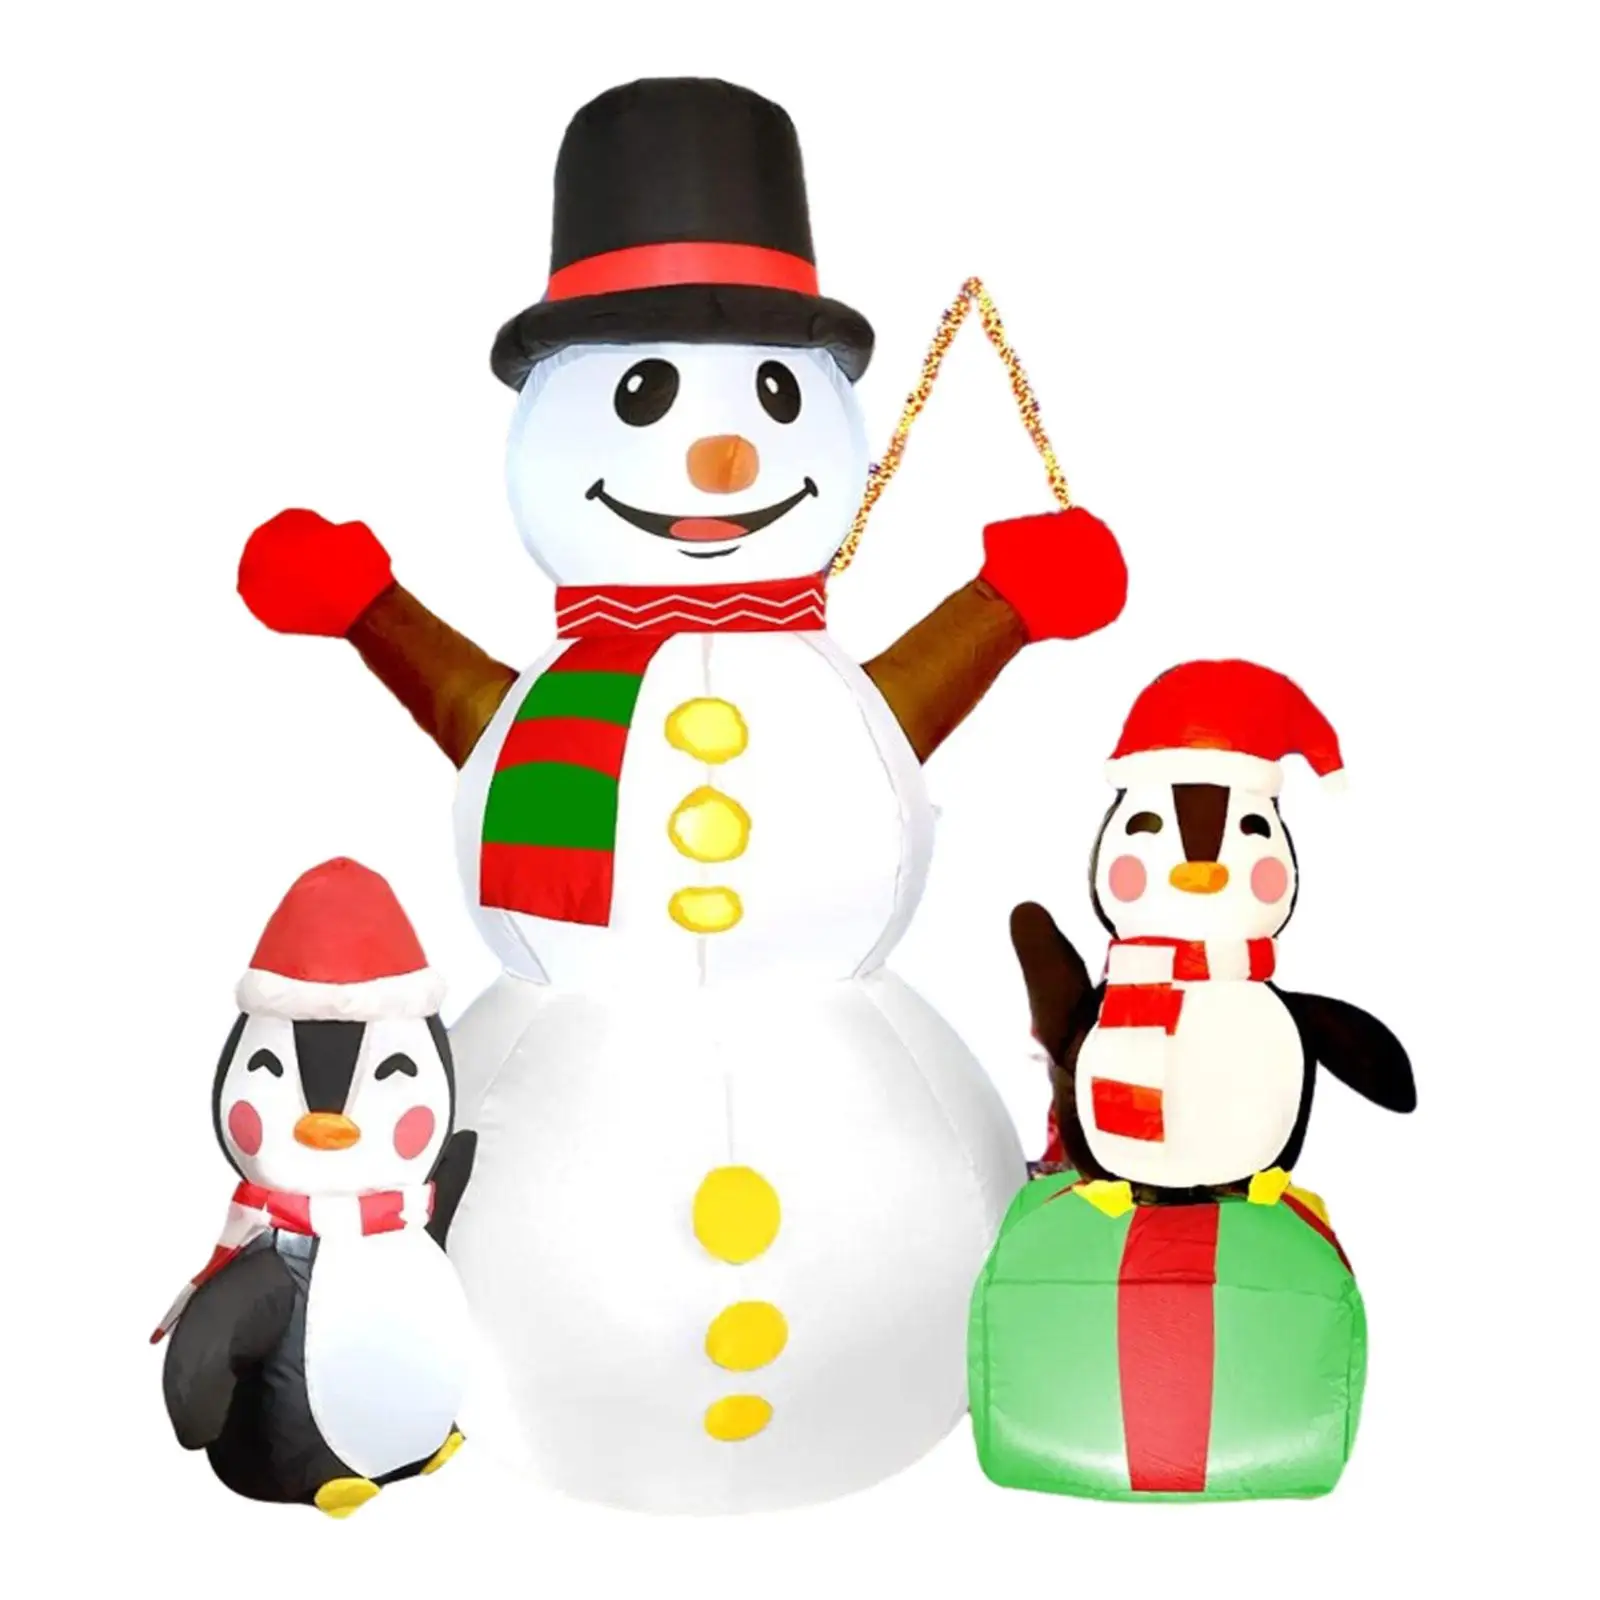 

Christmas Inflatable Snowman Cute 5.9ft Tall Weatherproof Luminous Toy Outdoor Decoration for Garden Outside Patio Holiday Decor